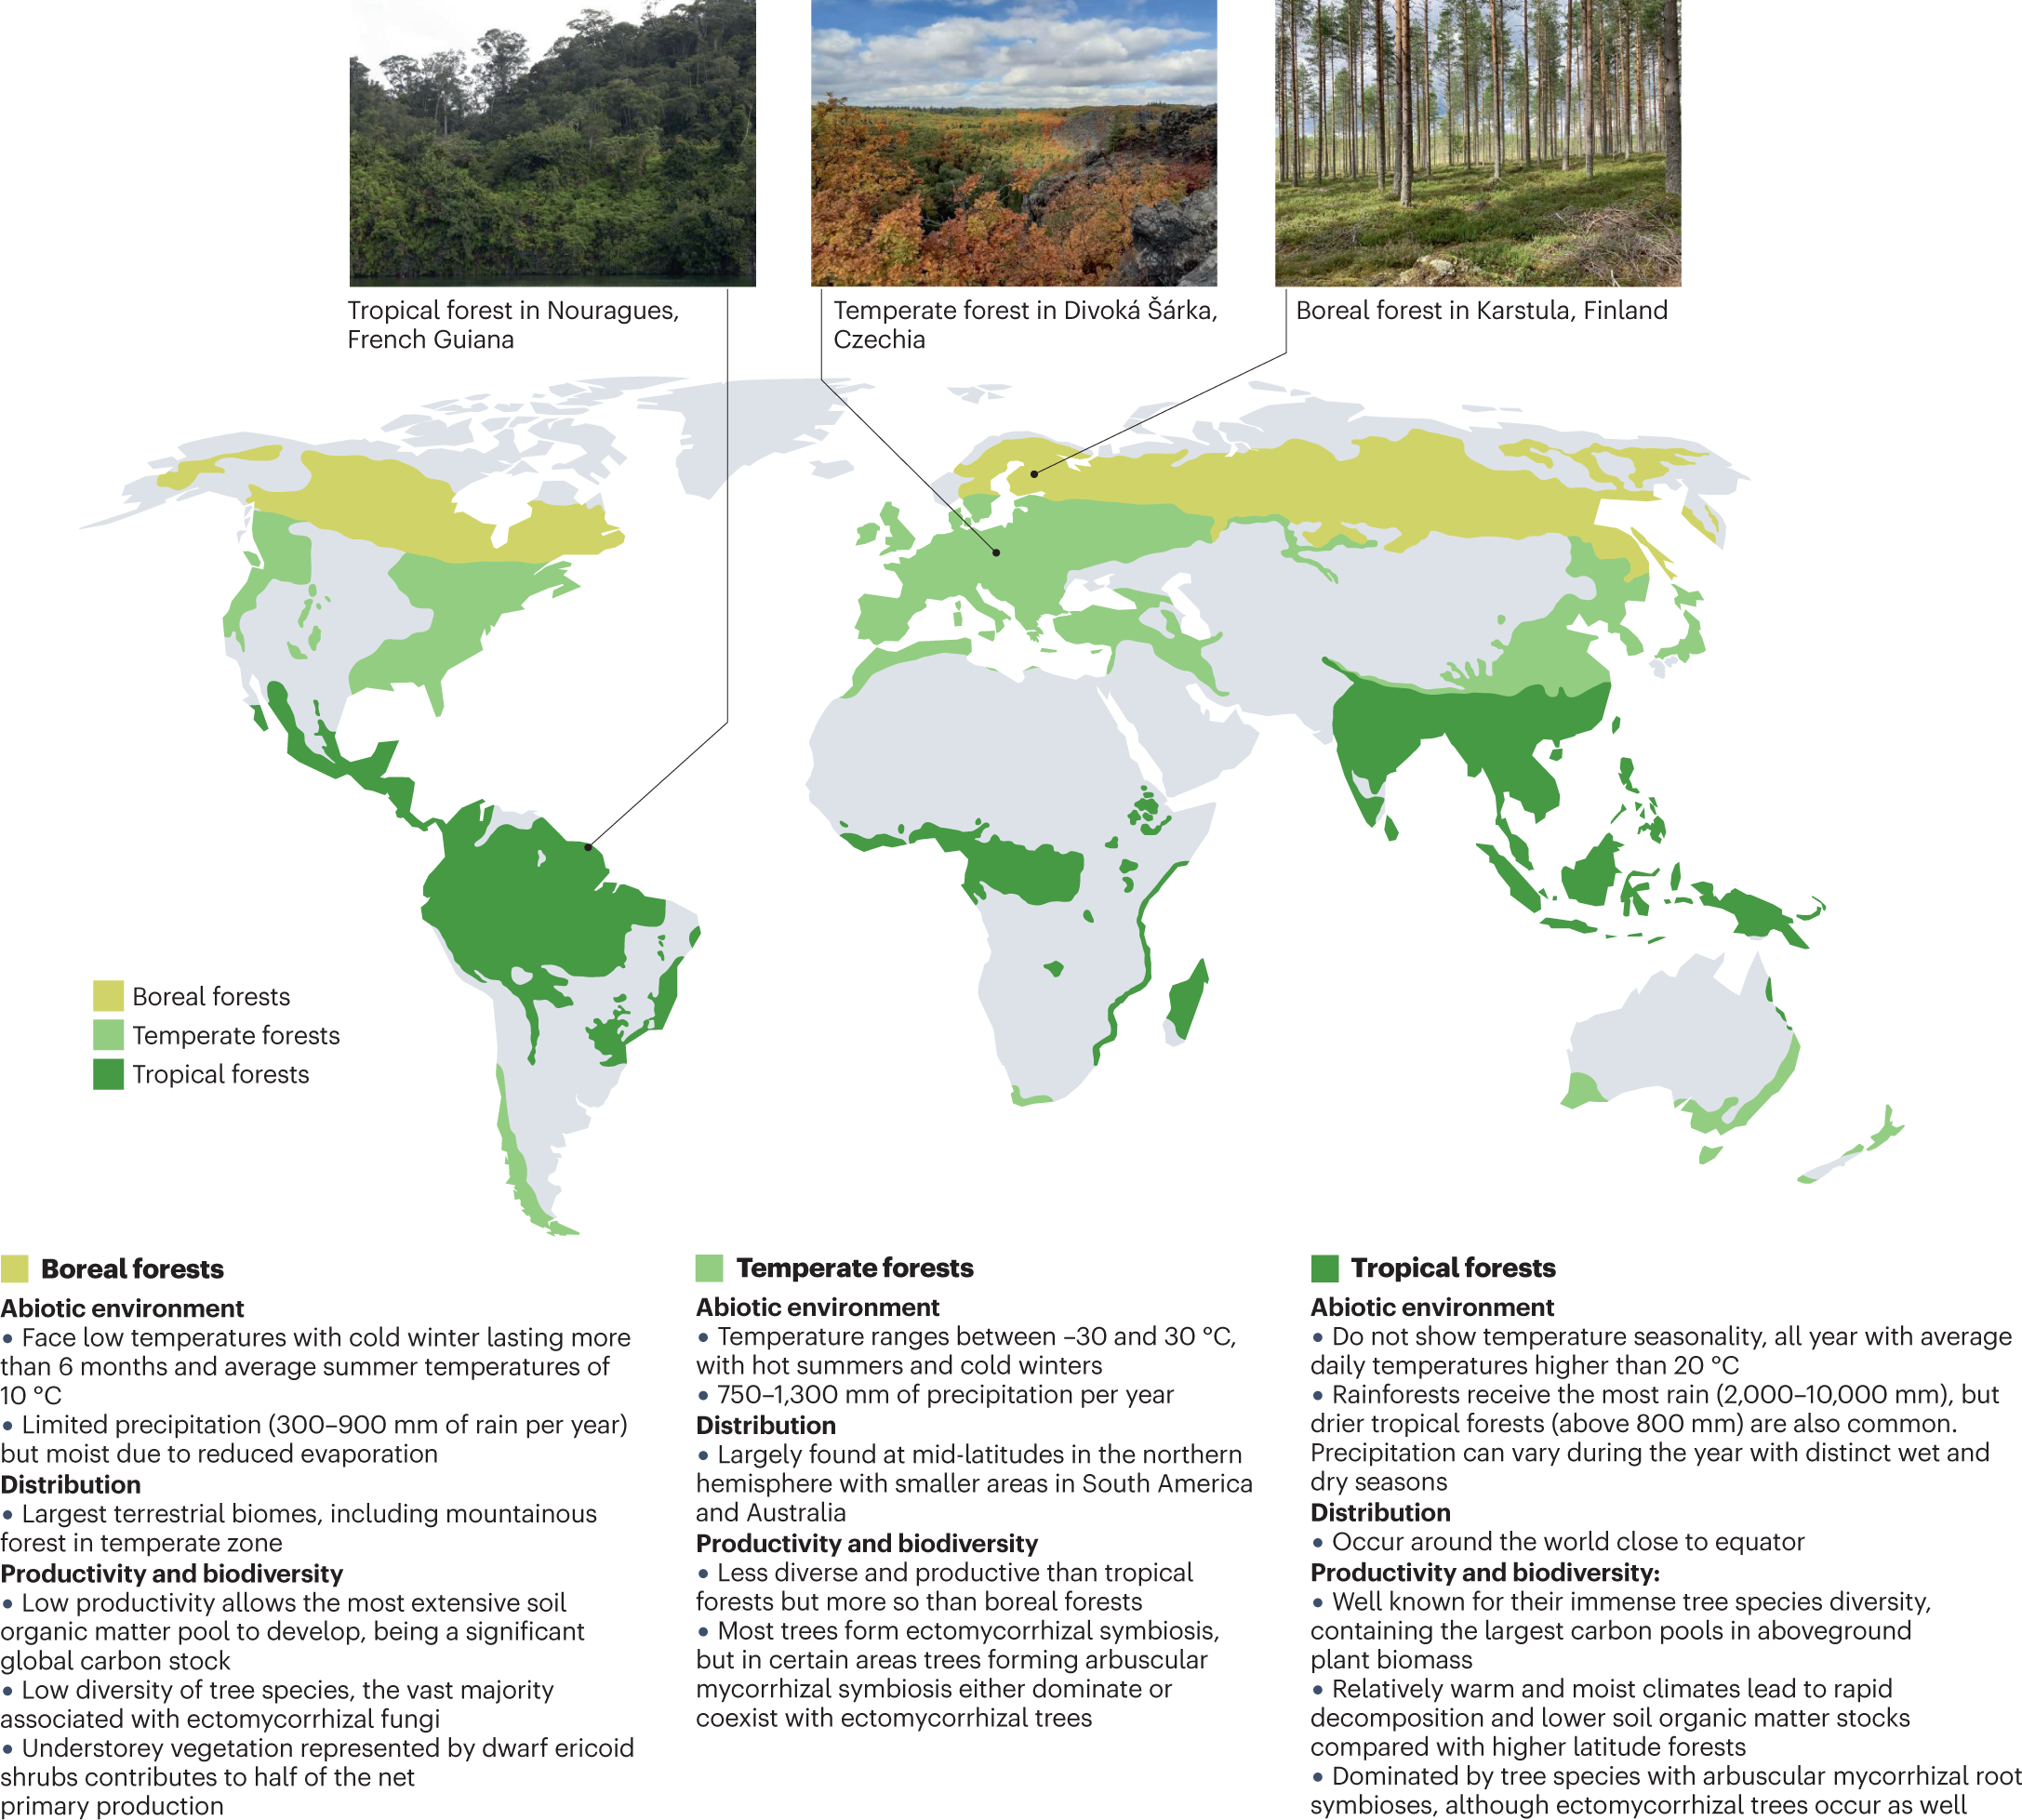 Forest microbiome and global change